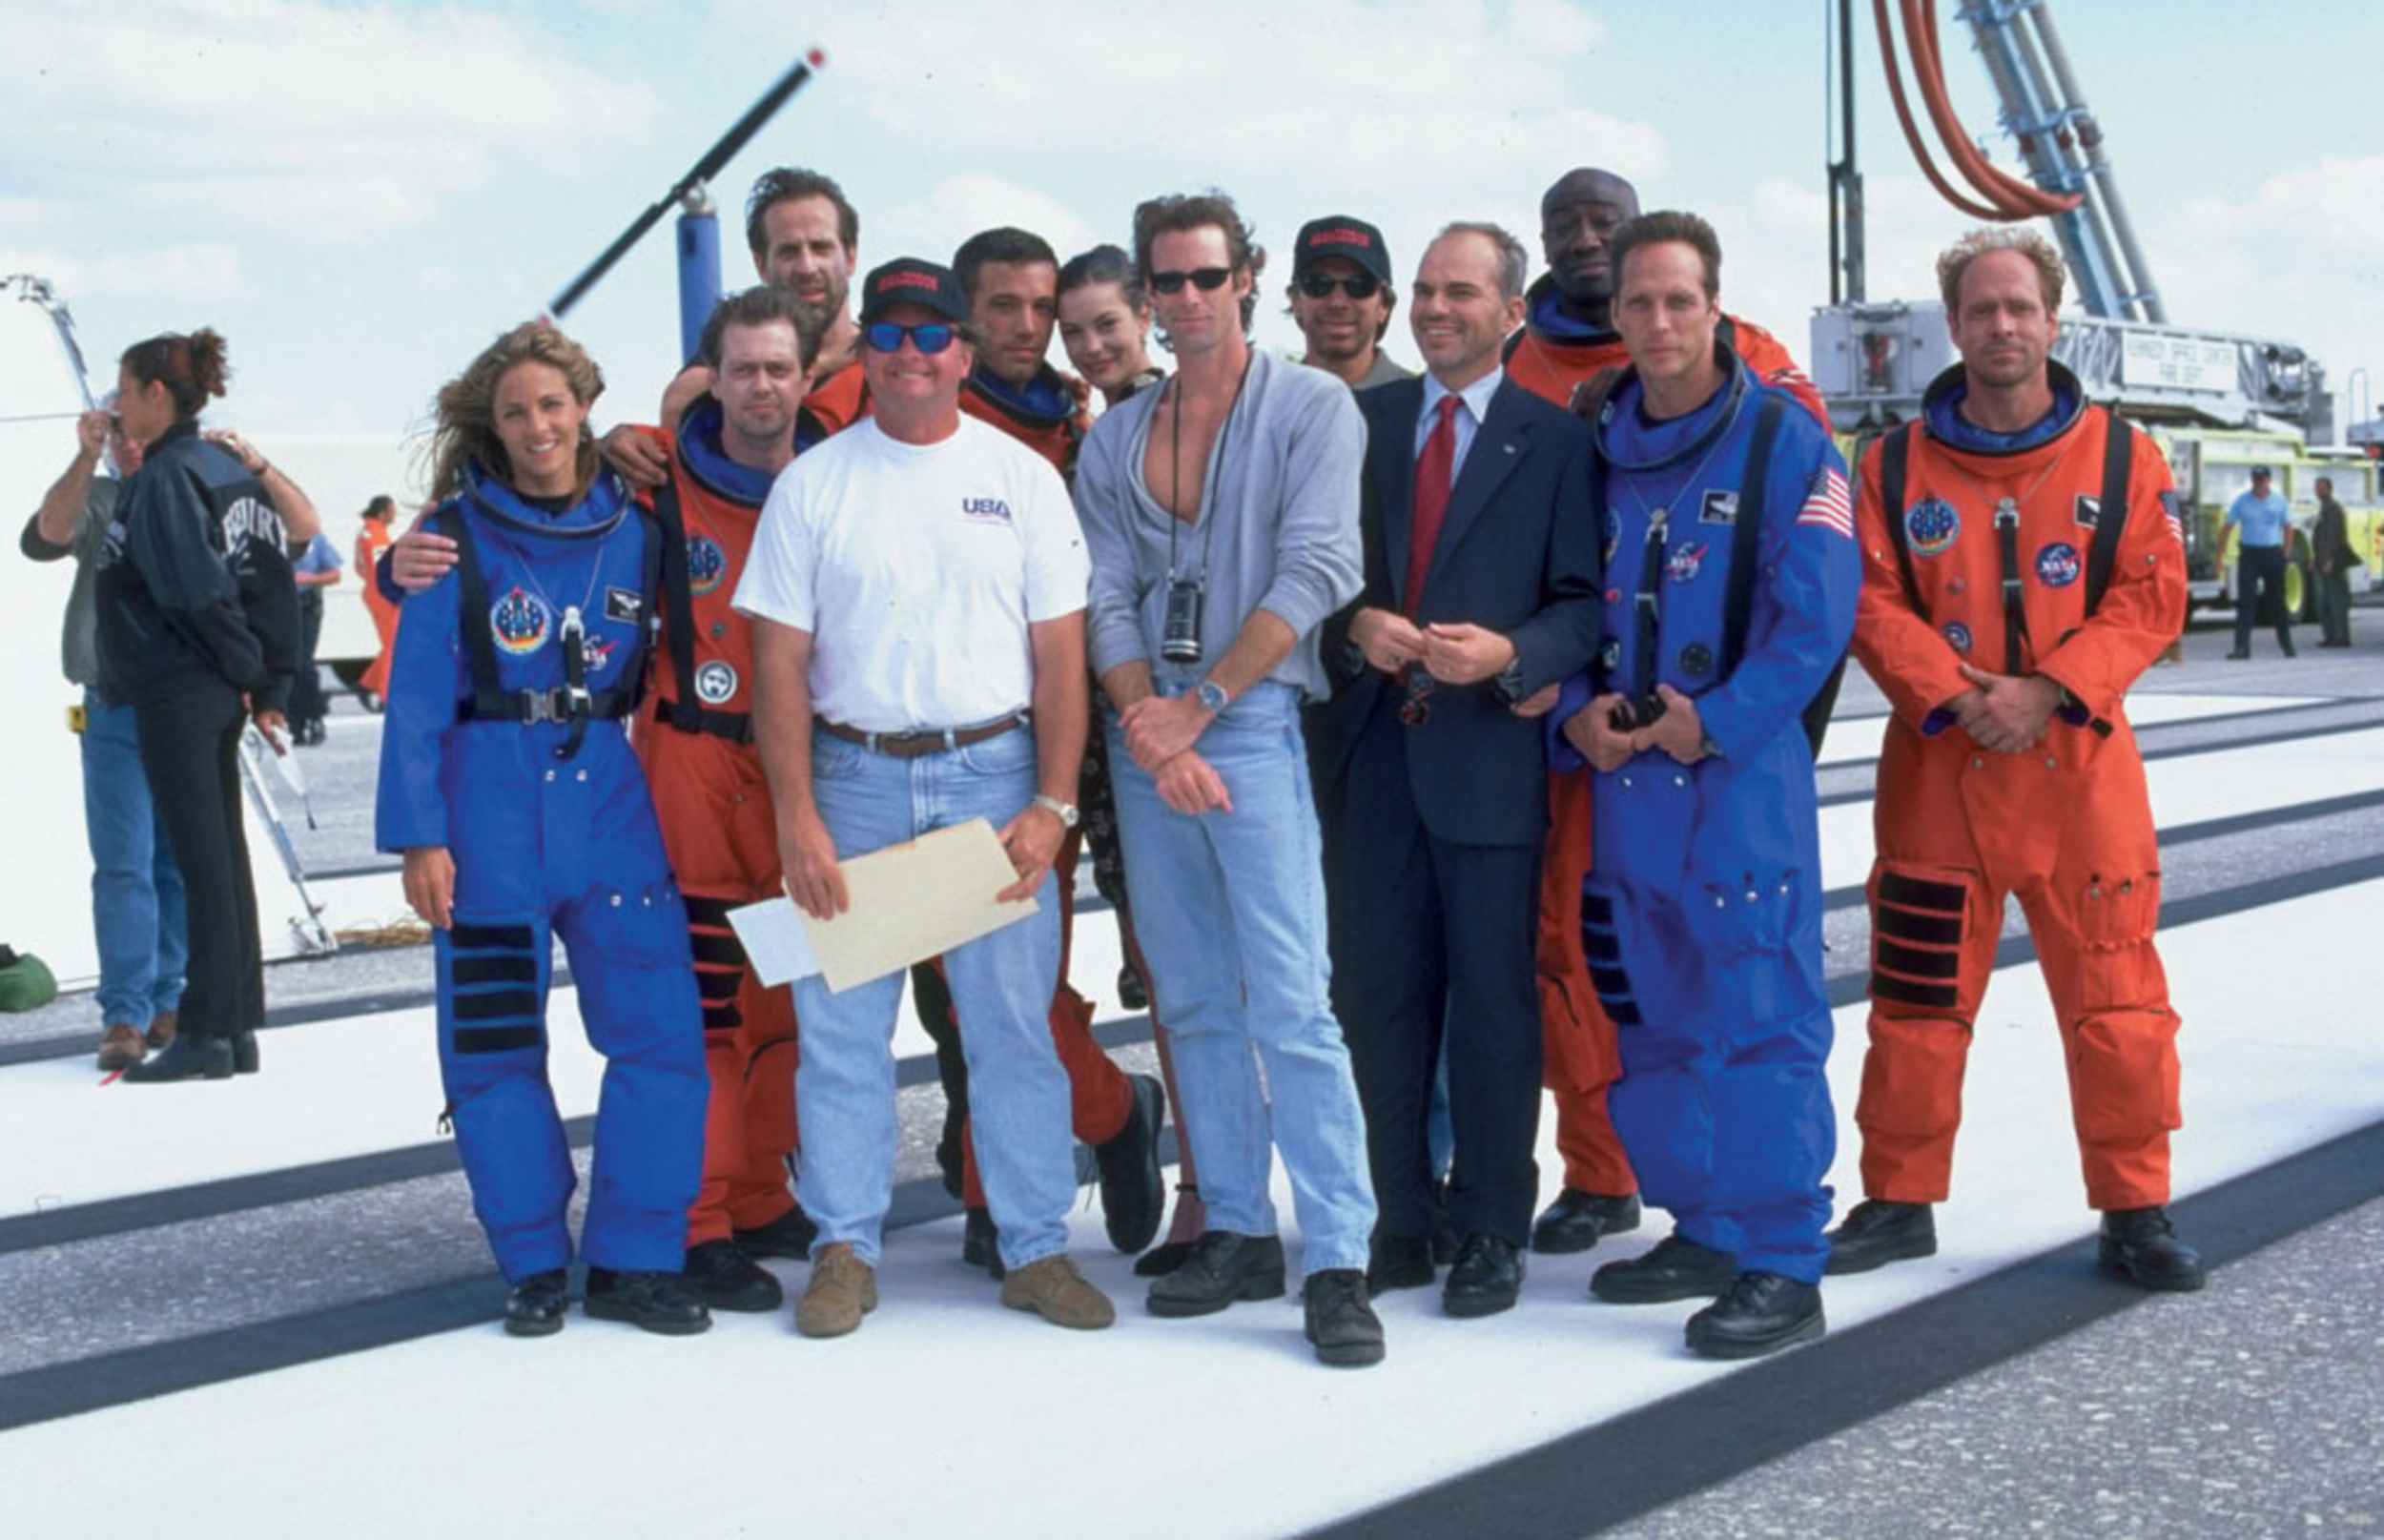 <p>So, why did they train oil drillers to be astronauts instead of training astronauts to be oil drillers? This is a fair question, and one Ben Affleck asked Bay while working on the movie. He recounted this on the DVD commentary track for <em>Armageddon</em>. Affleck then gave us Bay’s airtight reasoning: “He told me to shut the f—k up, so that was the end of that talk.”</p>